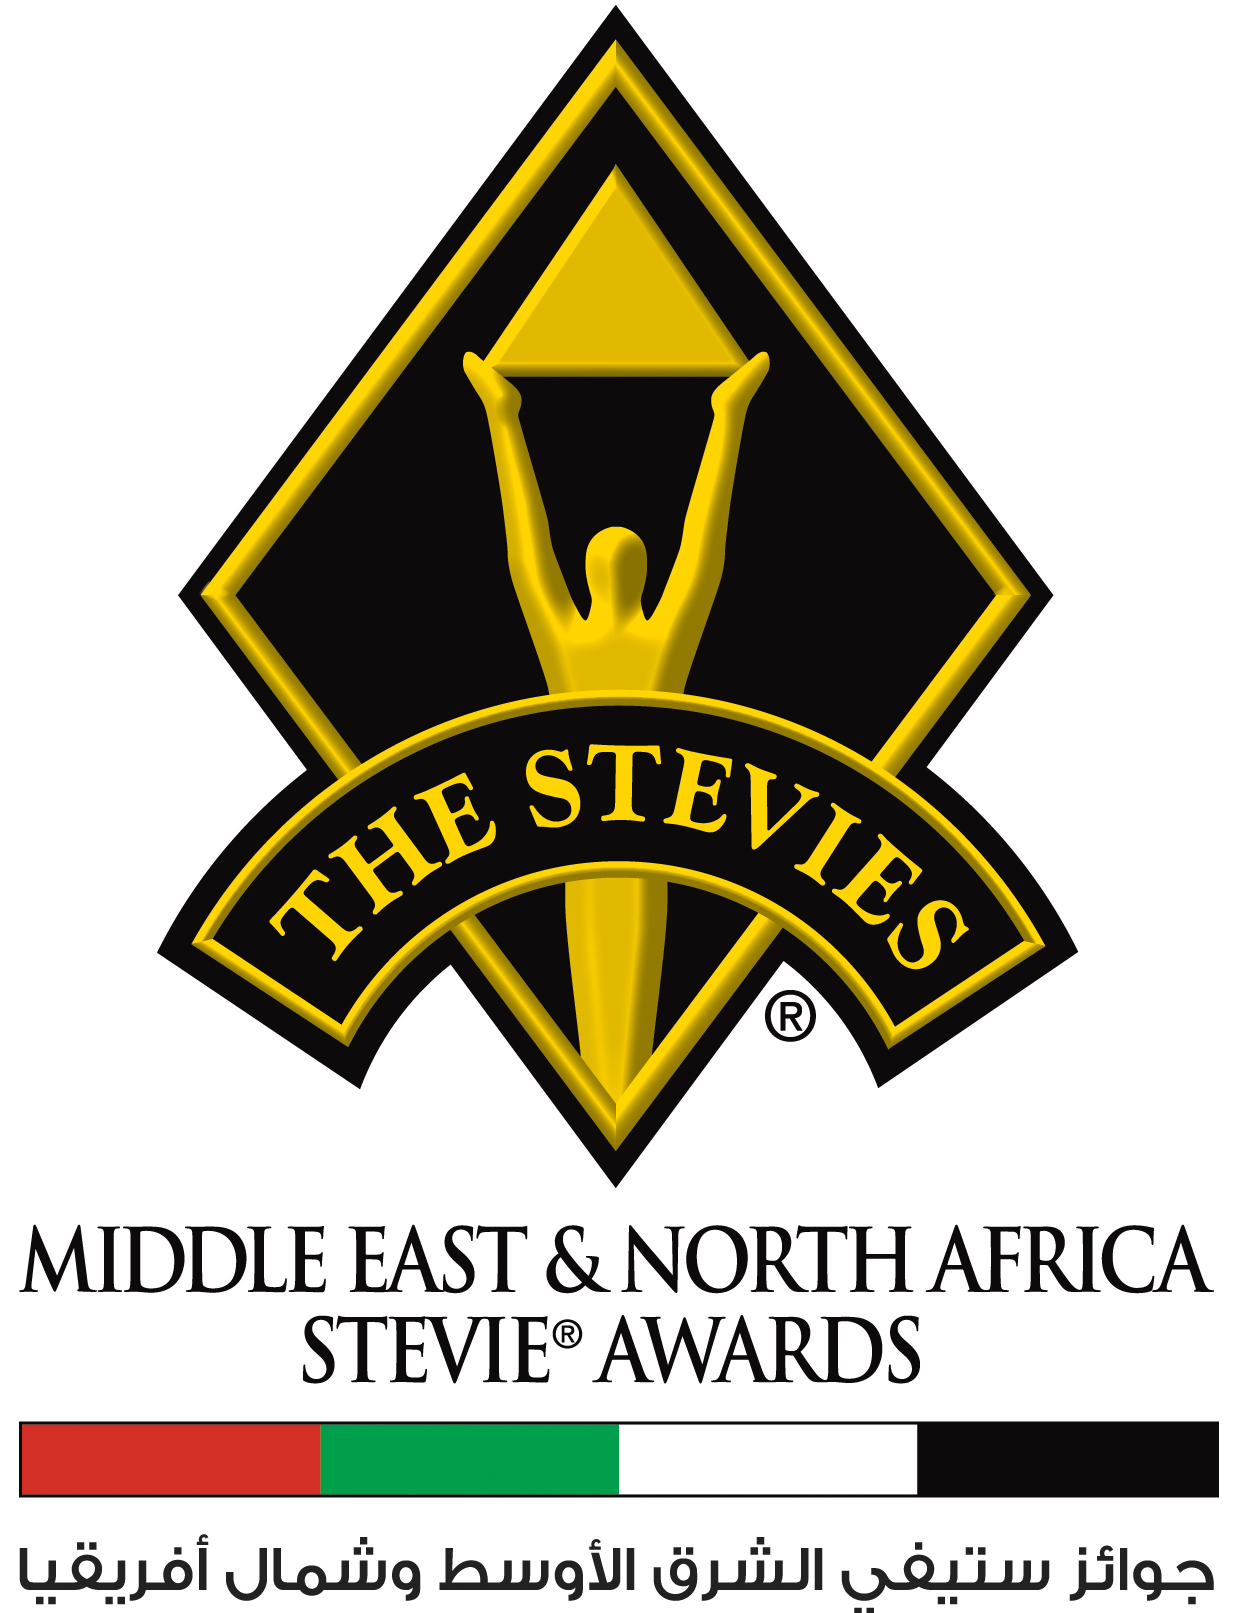 Call For Entries Issued For The Second Annual Middle East & North Africa Stevie® Awards